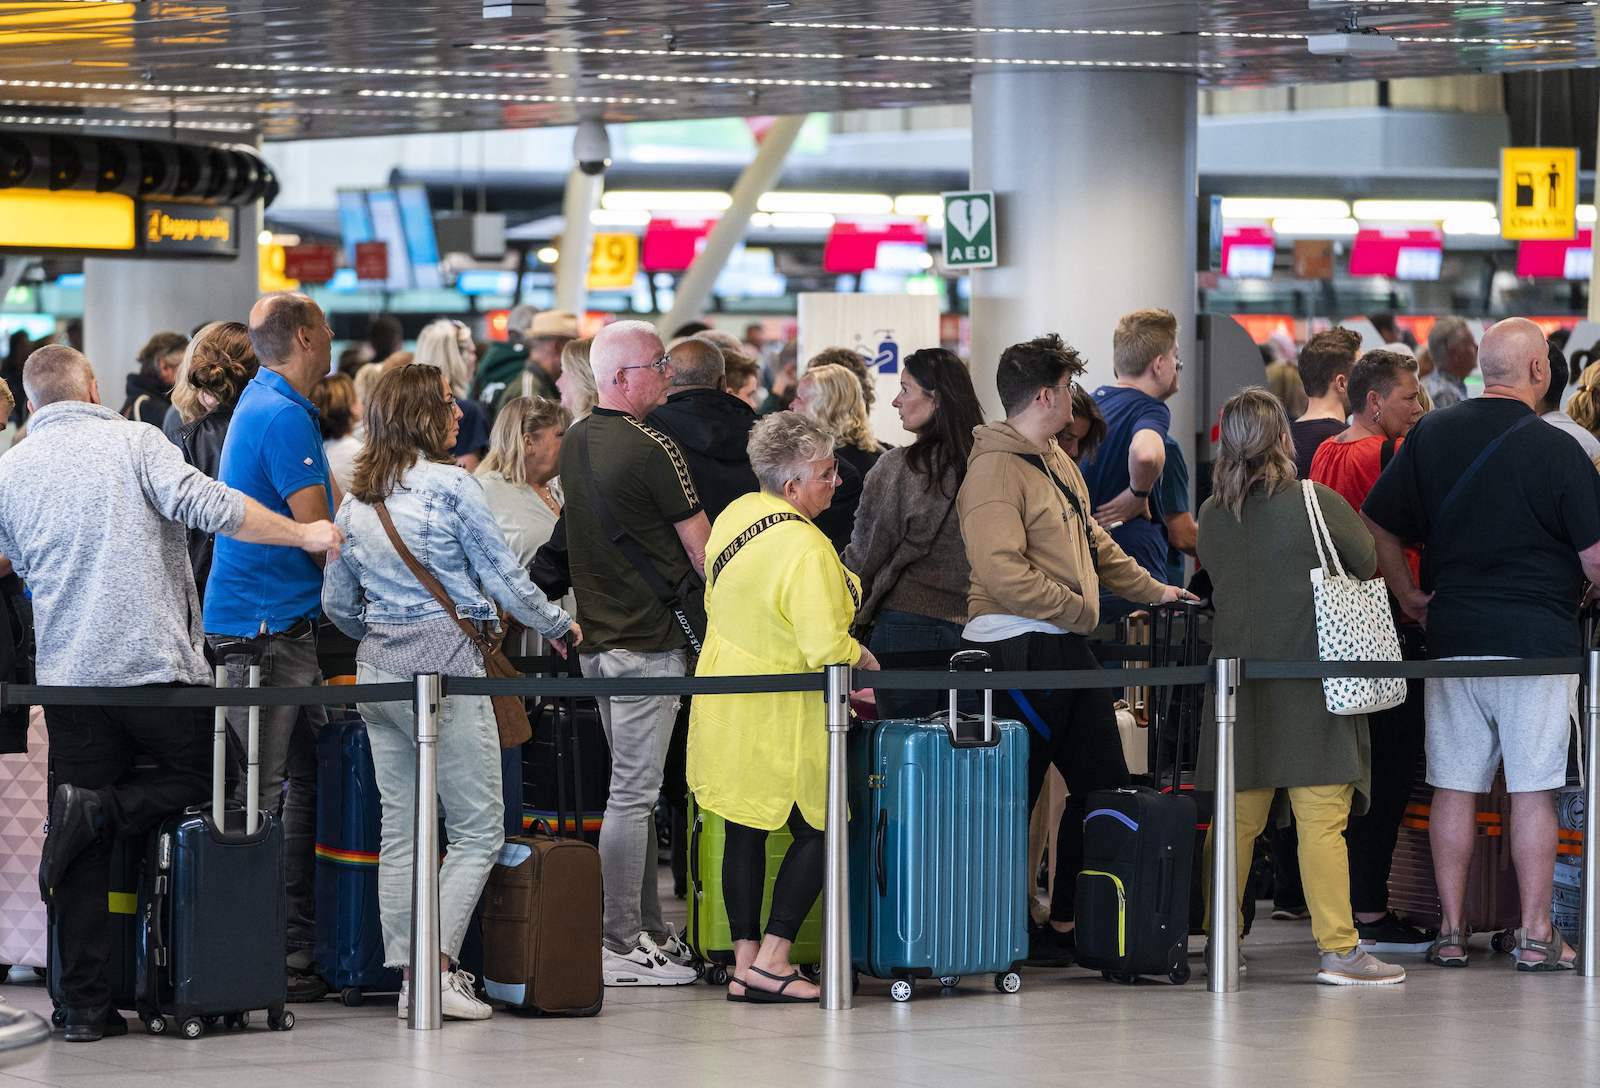 crowds wait in a long line at Amsterdam Schiphol Airport